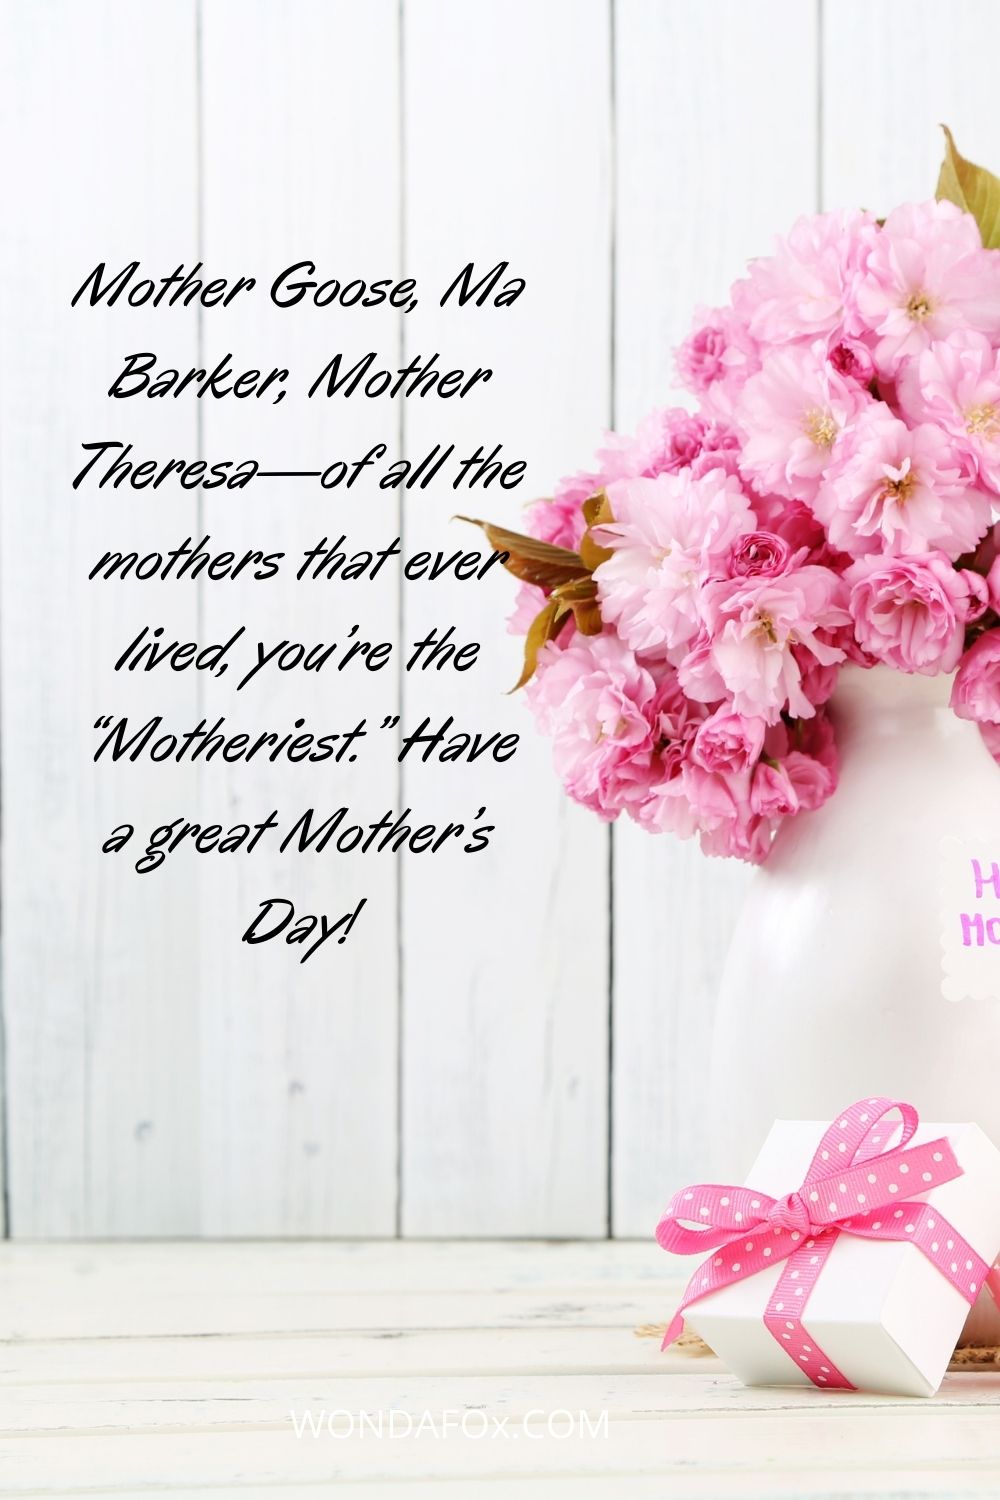 Mother Goose, Ma Barker, Mother Theresa—of all the mothers that ever lived, you’re the “Motheriest.” Have a great Mother’s Day!